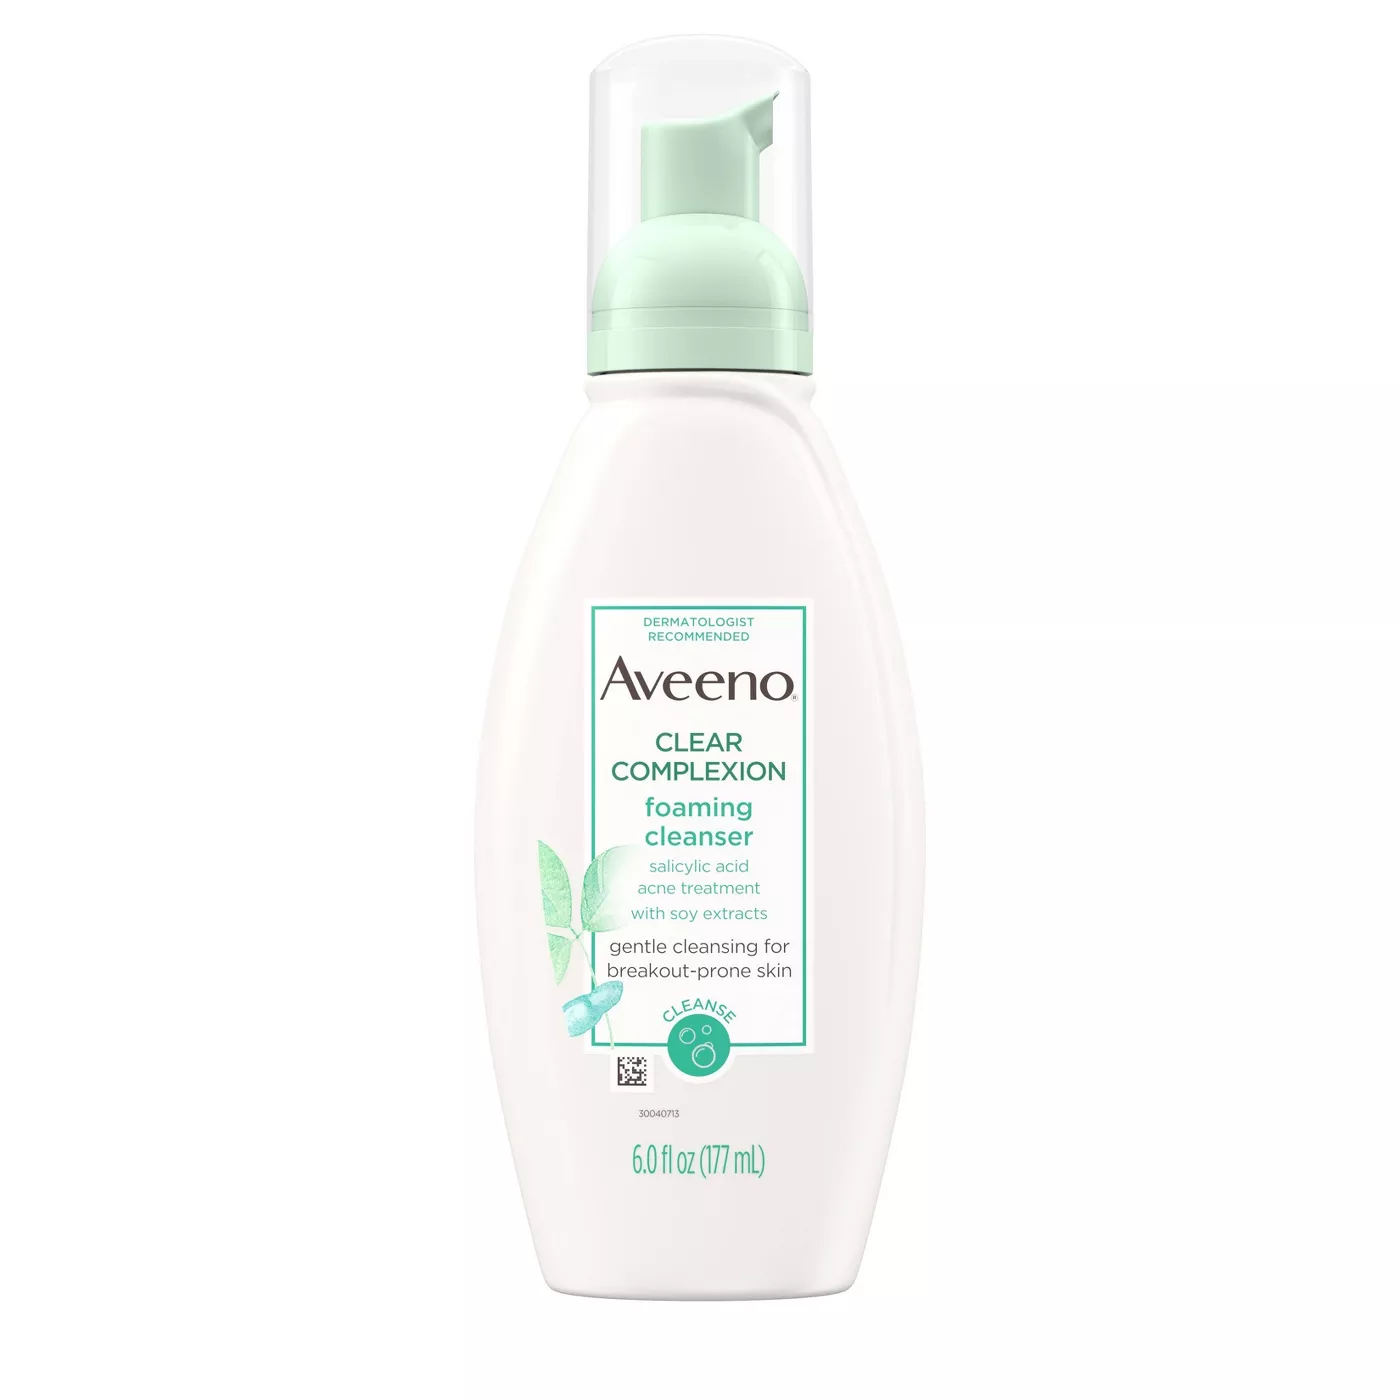 Aveeno Clear Complexion Foaming Cleanser- 6 fl oz - image 1 of 11